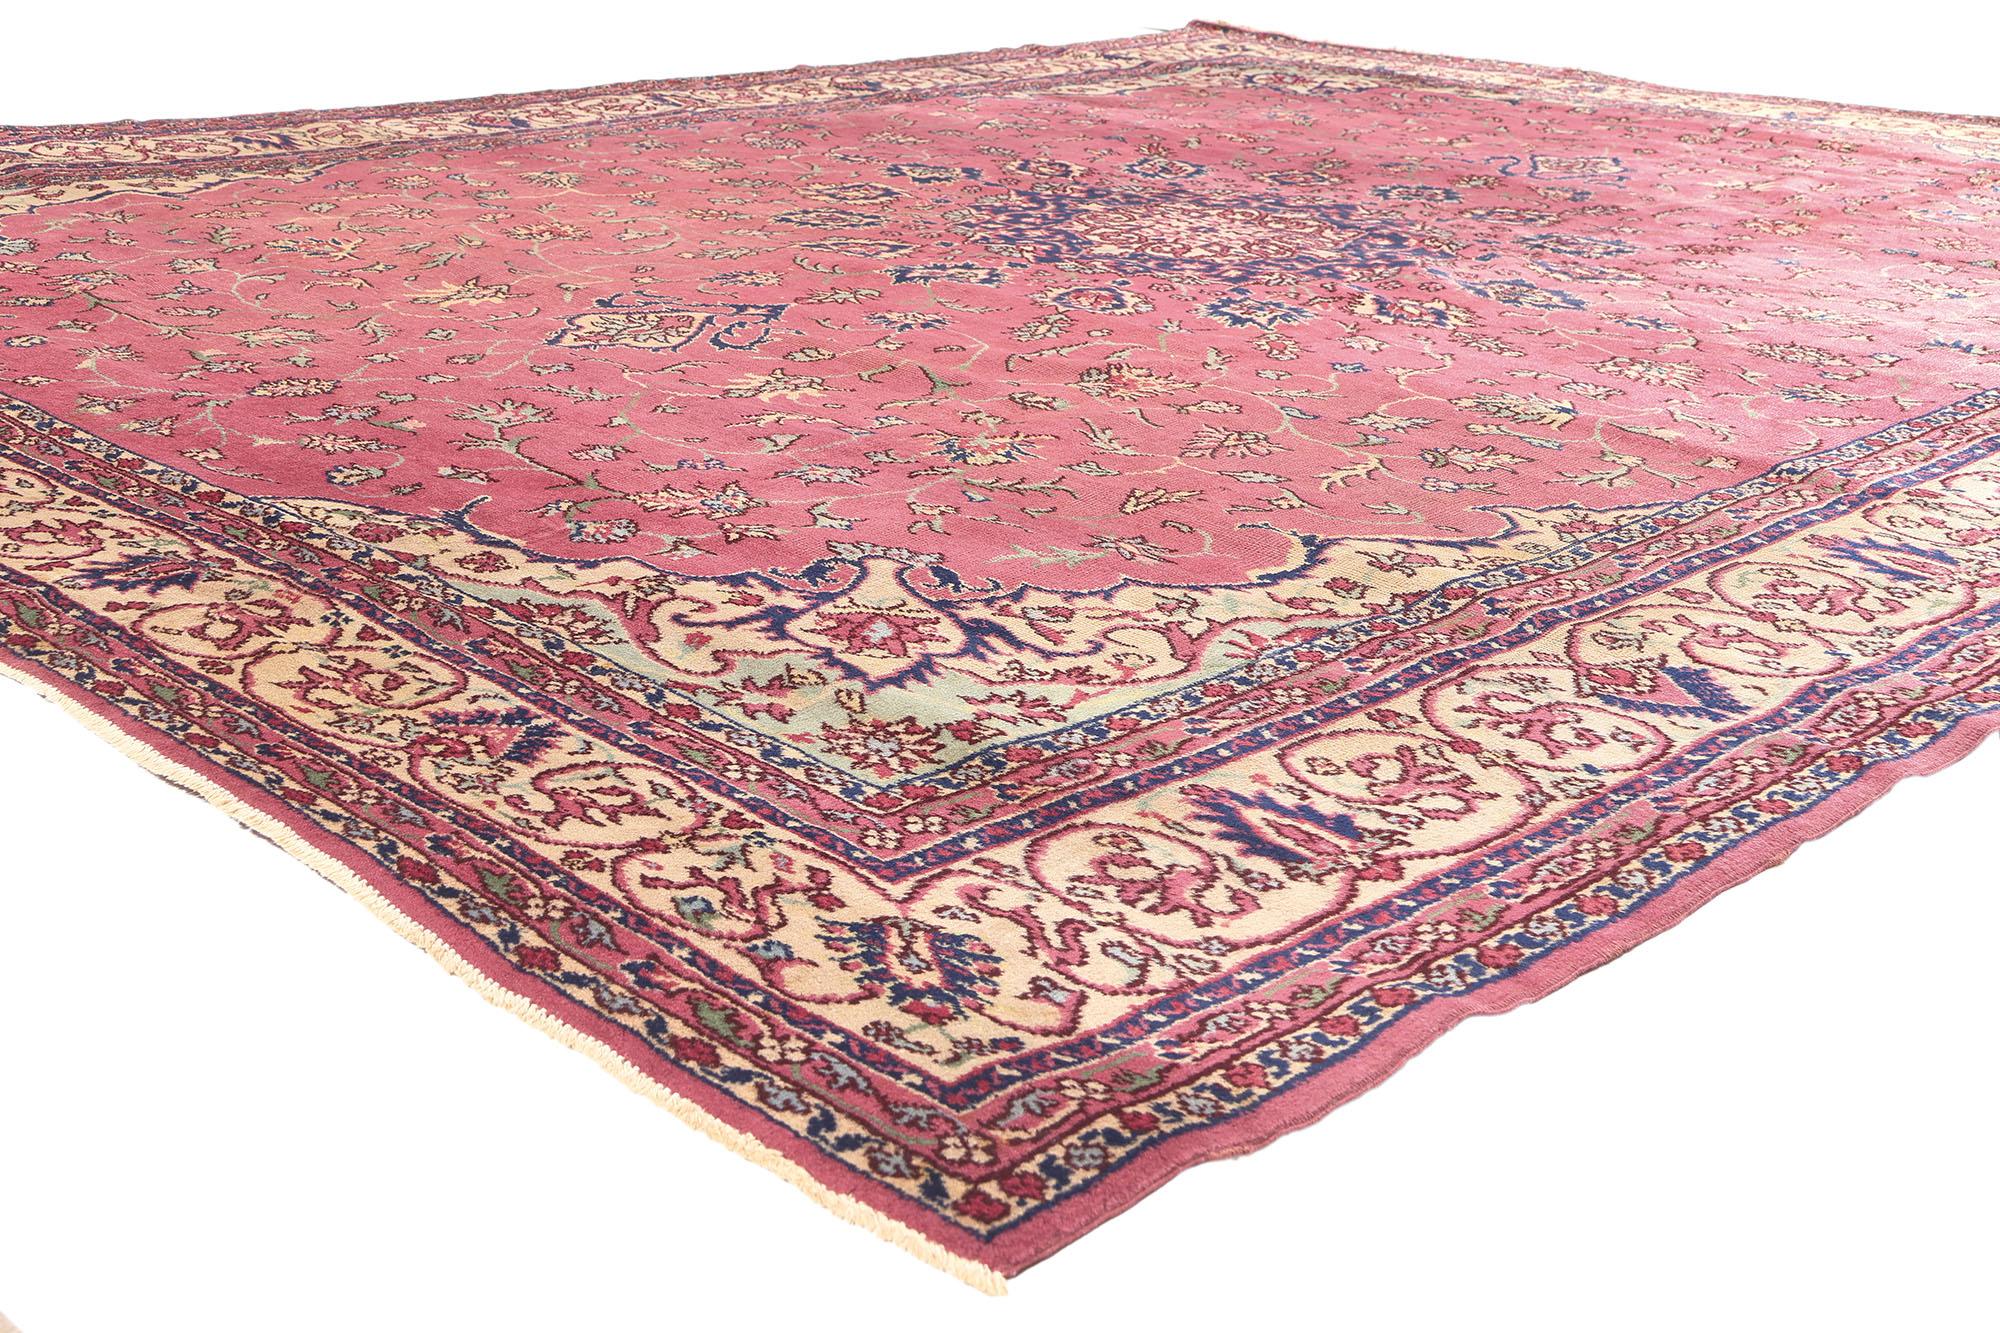 71968 Antique Turkish Sparta Rug, 09'09 x 12'00.

Infused with opulent intricacies, a symphony of harmonious hues unfolds in this hand-knotted wool antique Turkish Sparta rug, a captivating ode to the Romantic Art Nouveau style. The canvas, adorned